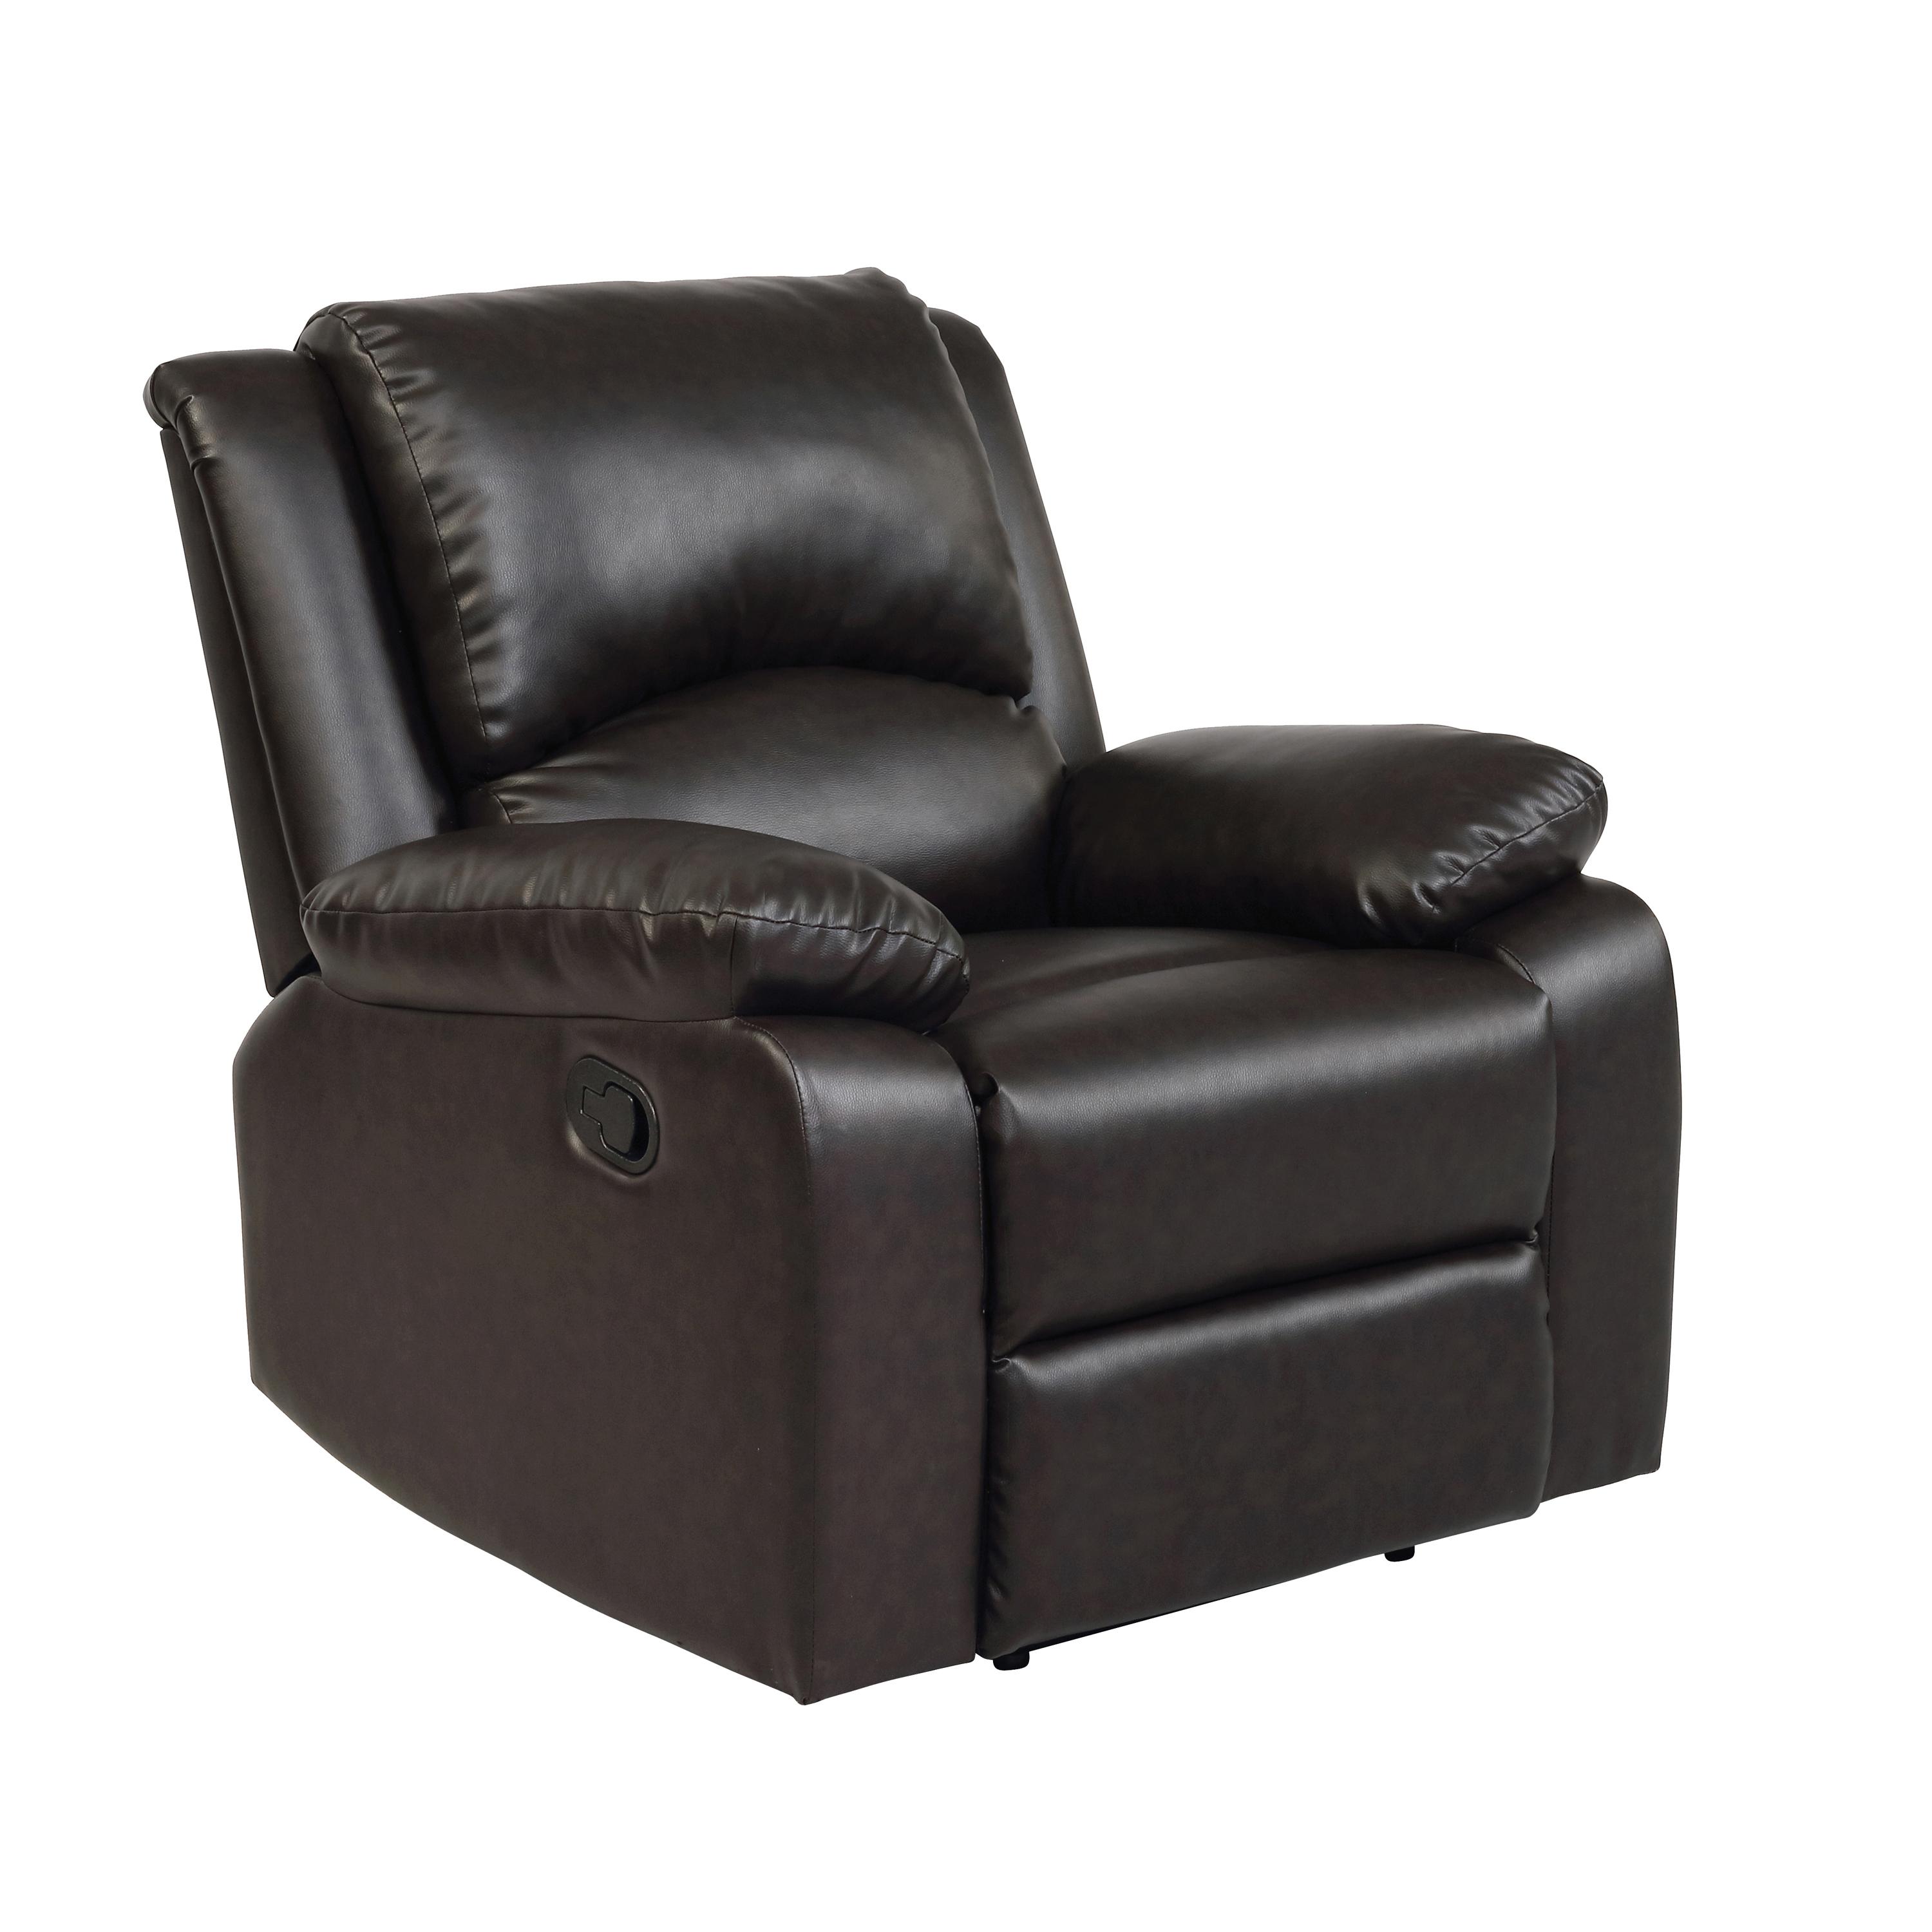 Transitional Recliner 600973 Boston 600973 in Brown Leatherette